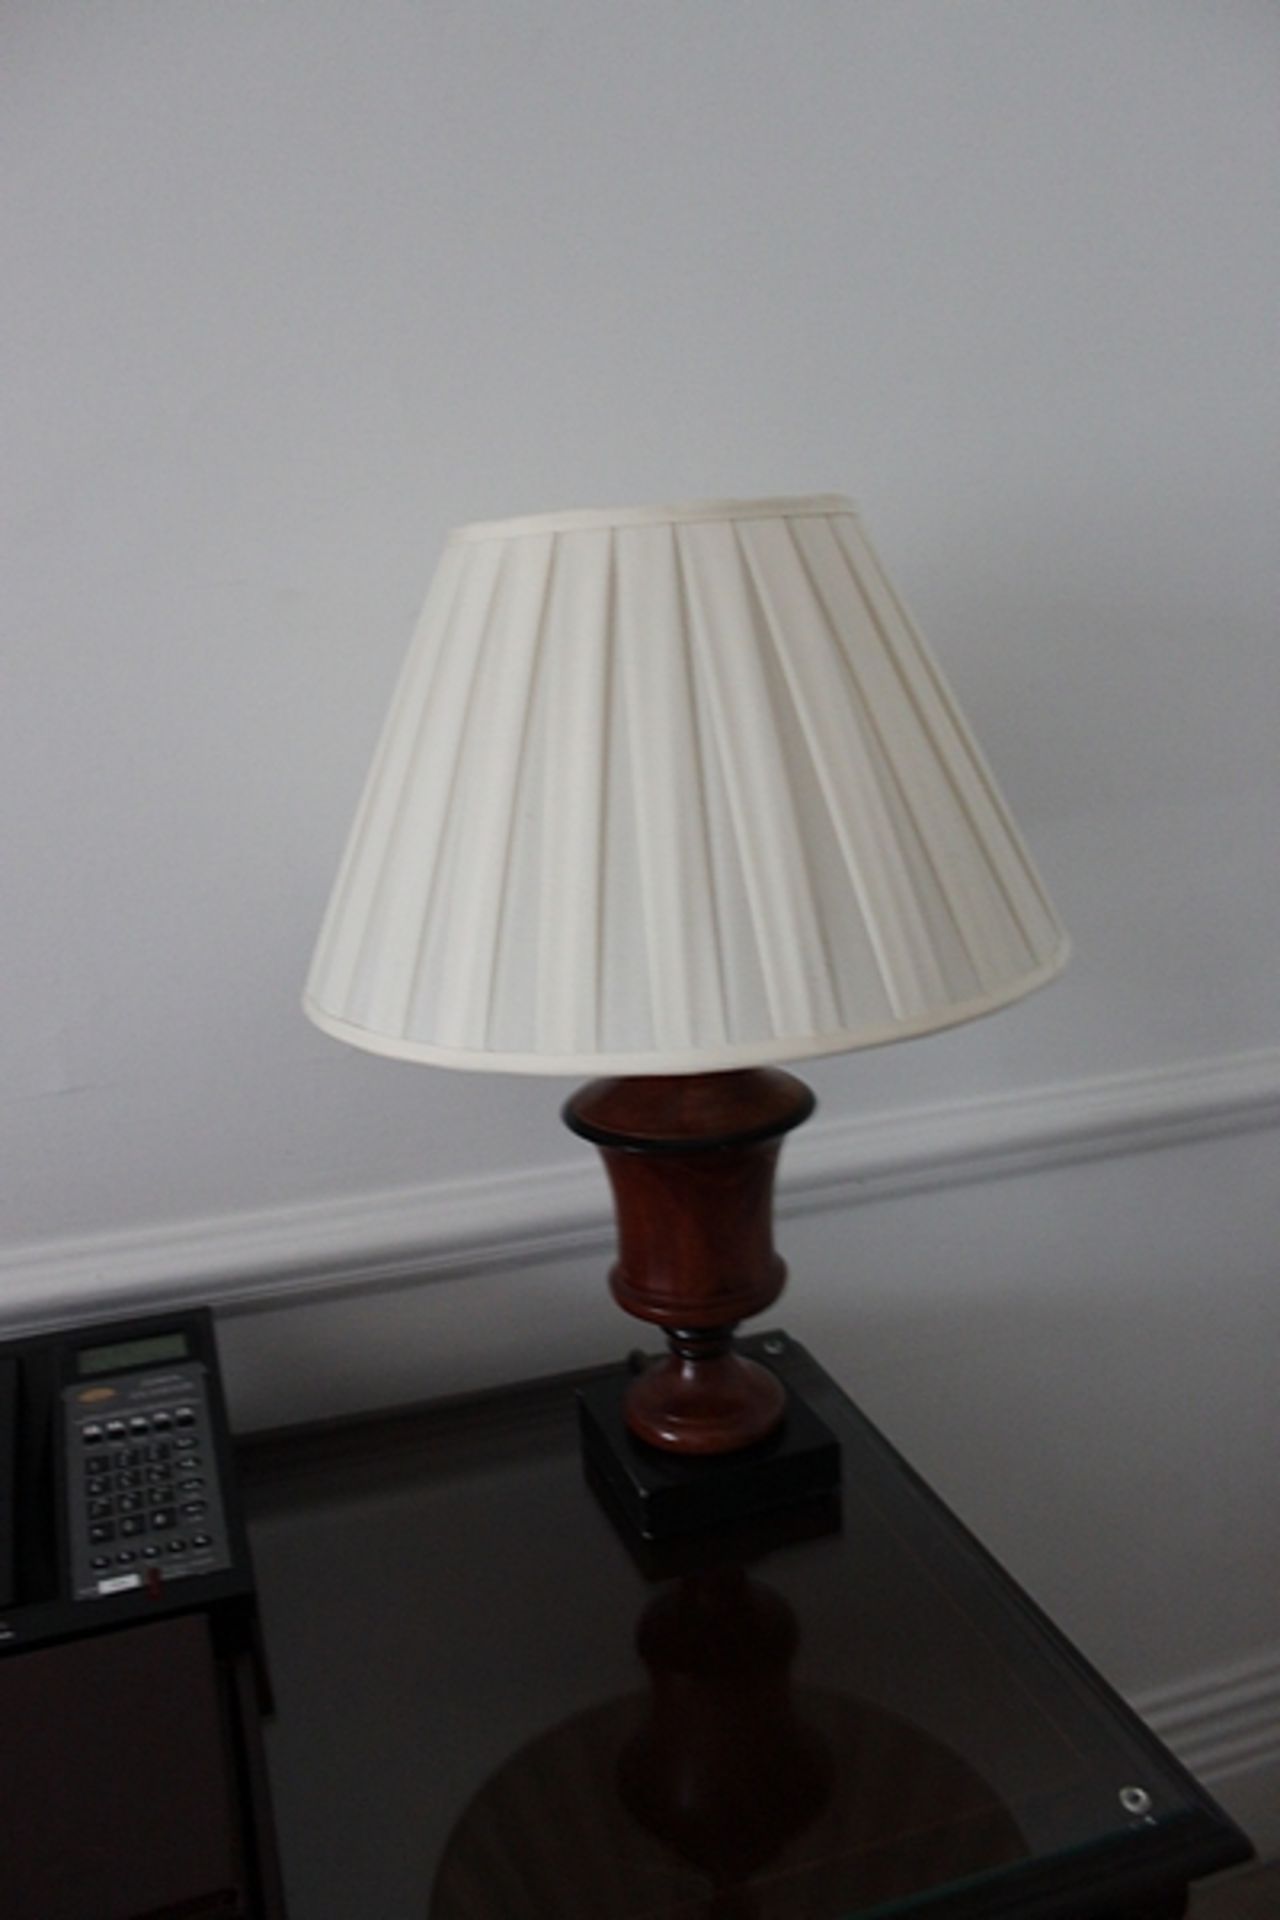 3 x lamps - 2 x small urn shape table lamps and 1 x swan neck brass table lamp - Image 2 of 2